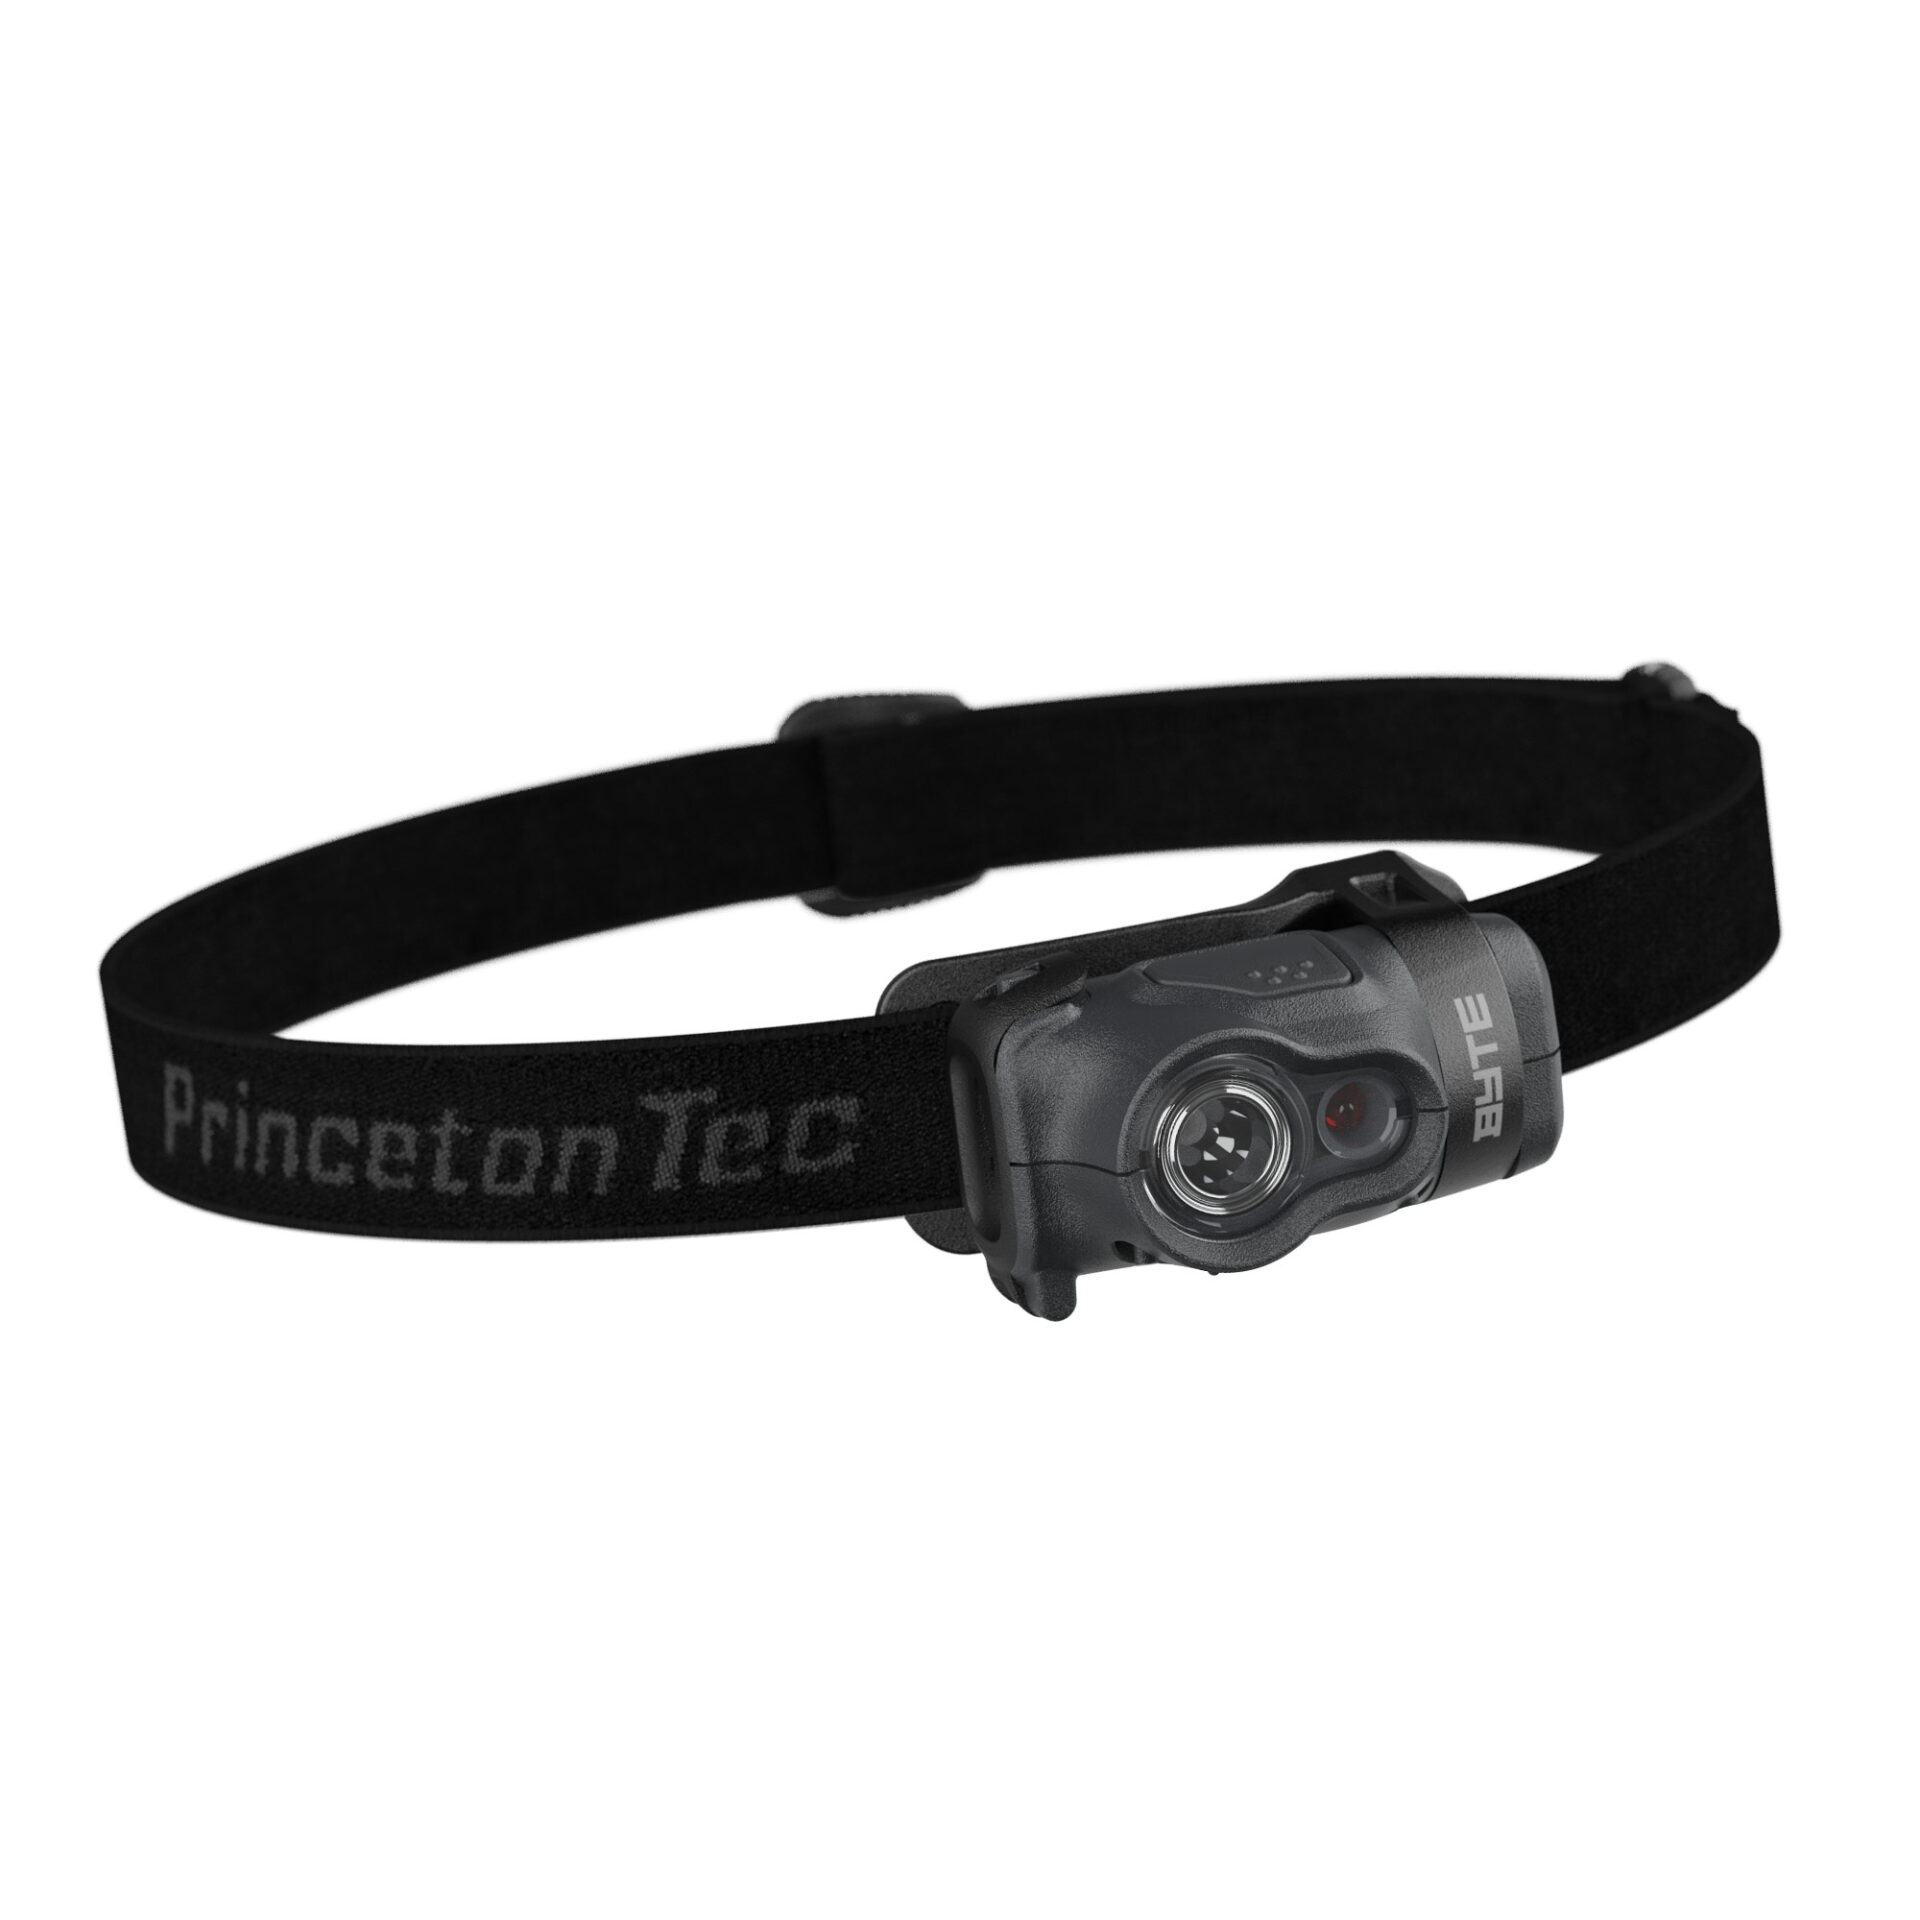 BYTE HEADLAMP is available for sale to the campers